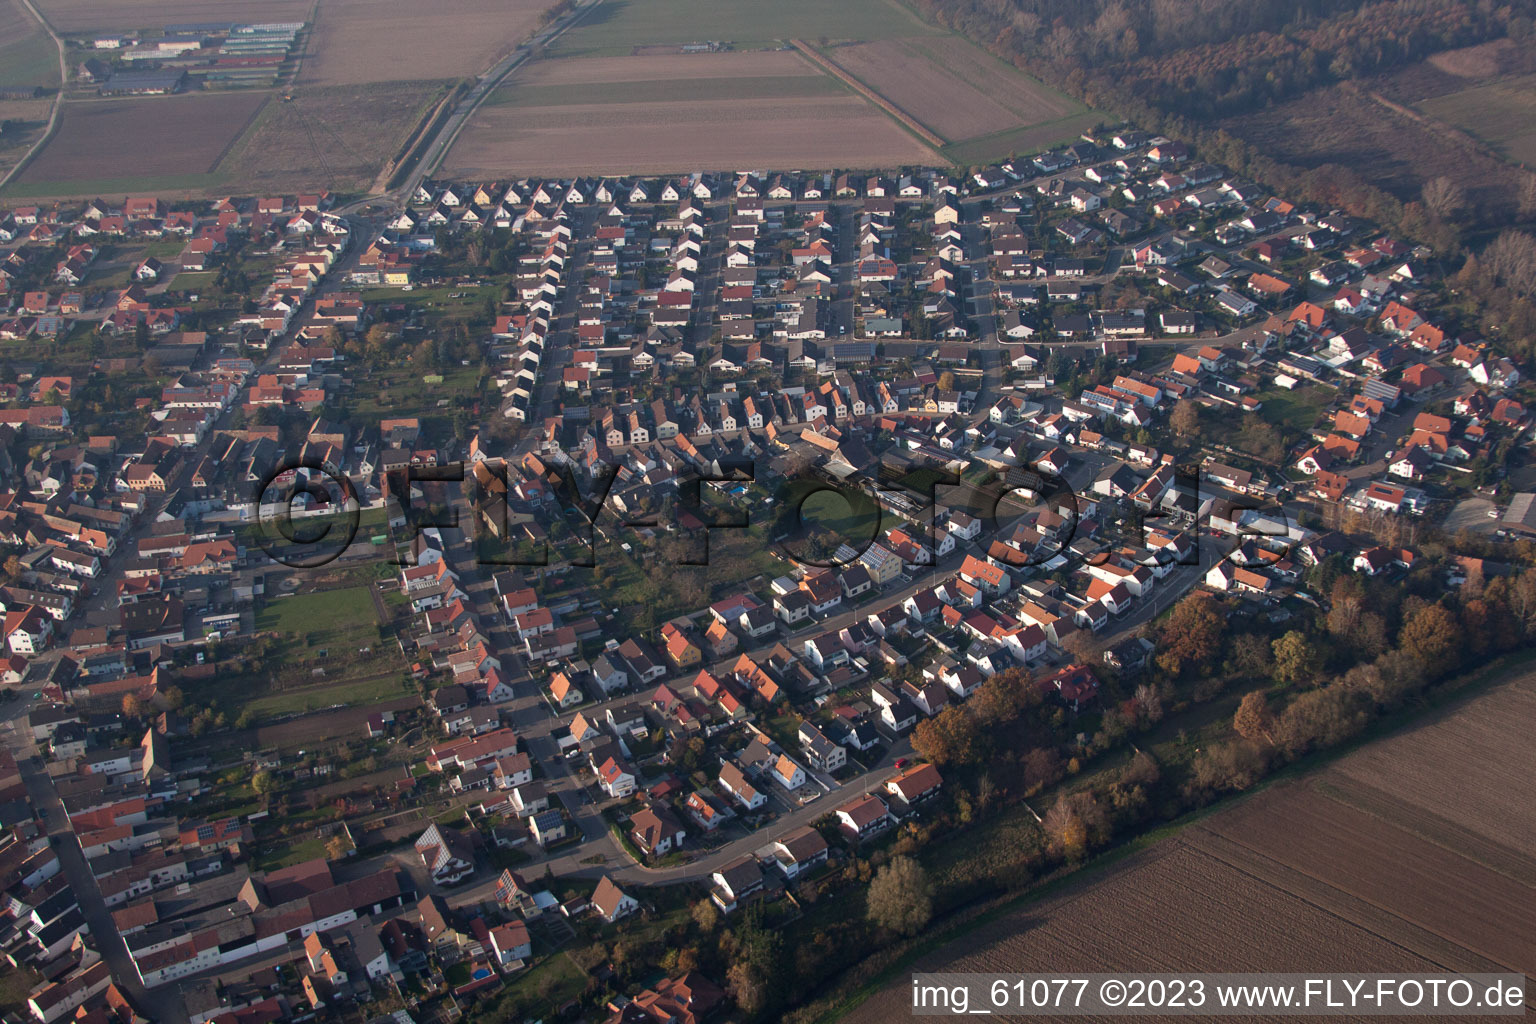 Hördt in the state Rhineland-Palatinate, Germany from the drone perspective